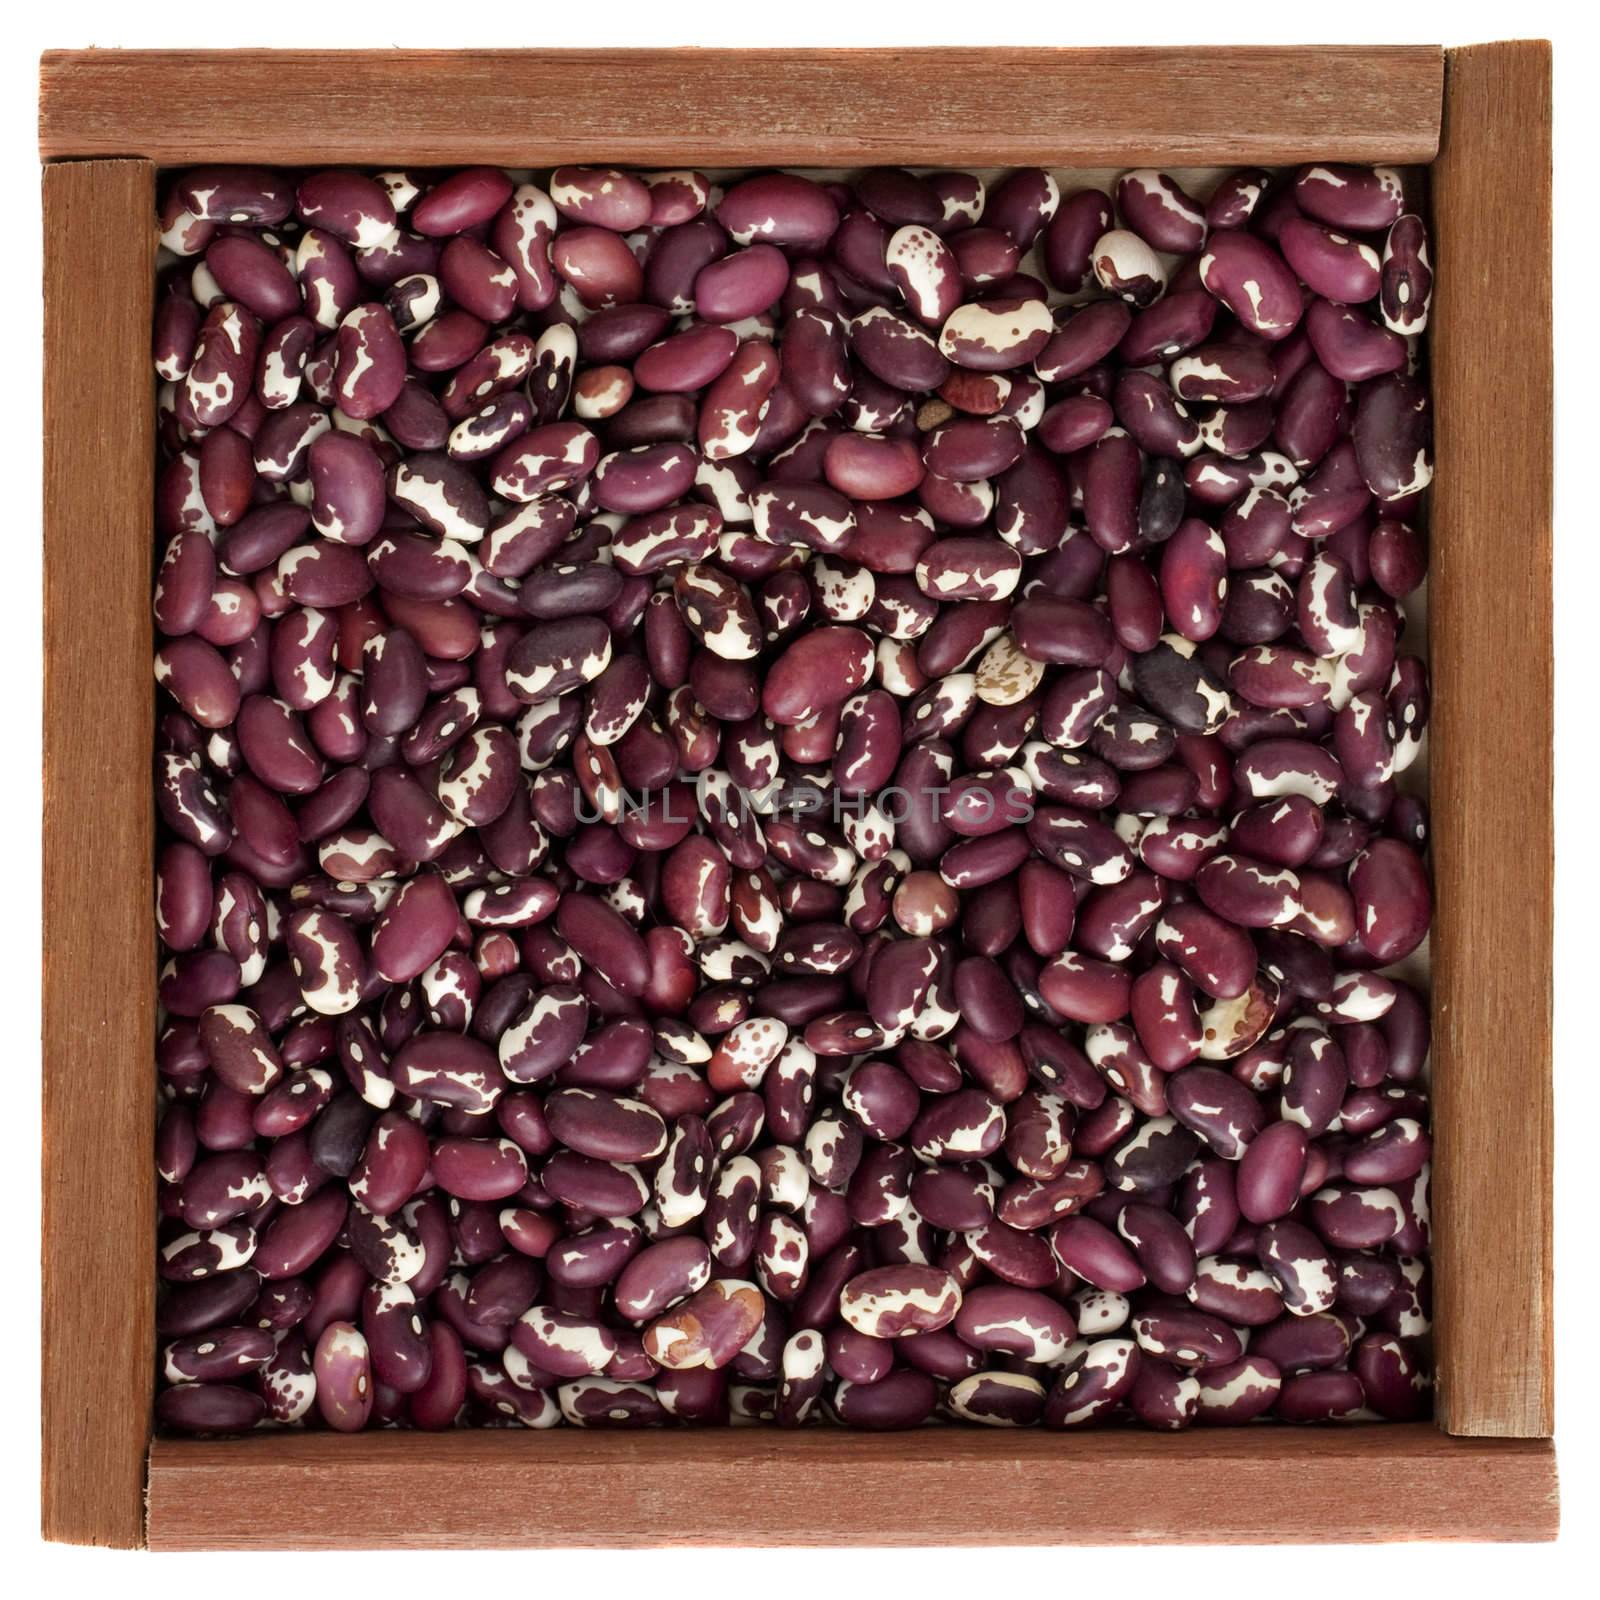 purple and white spotted Anasazi beans in a primitive square wooden box or frame, isolated